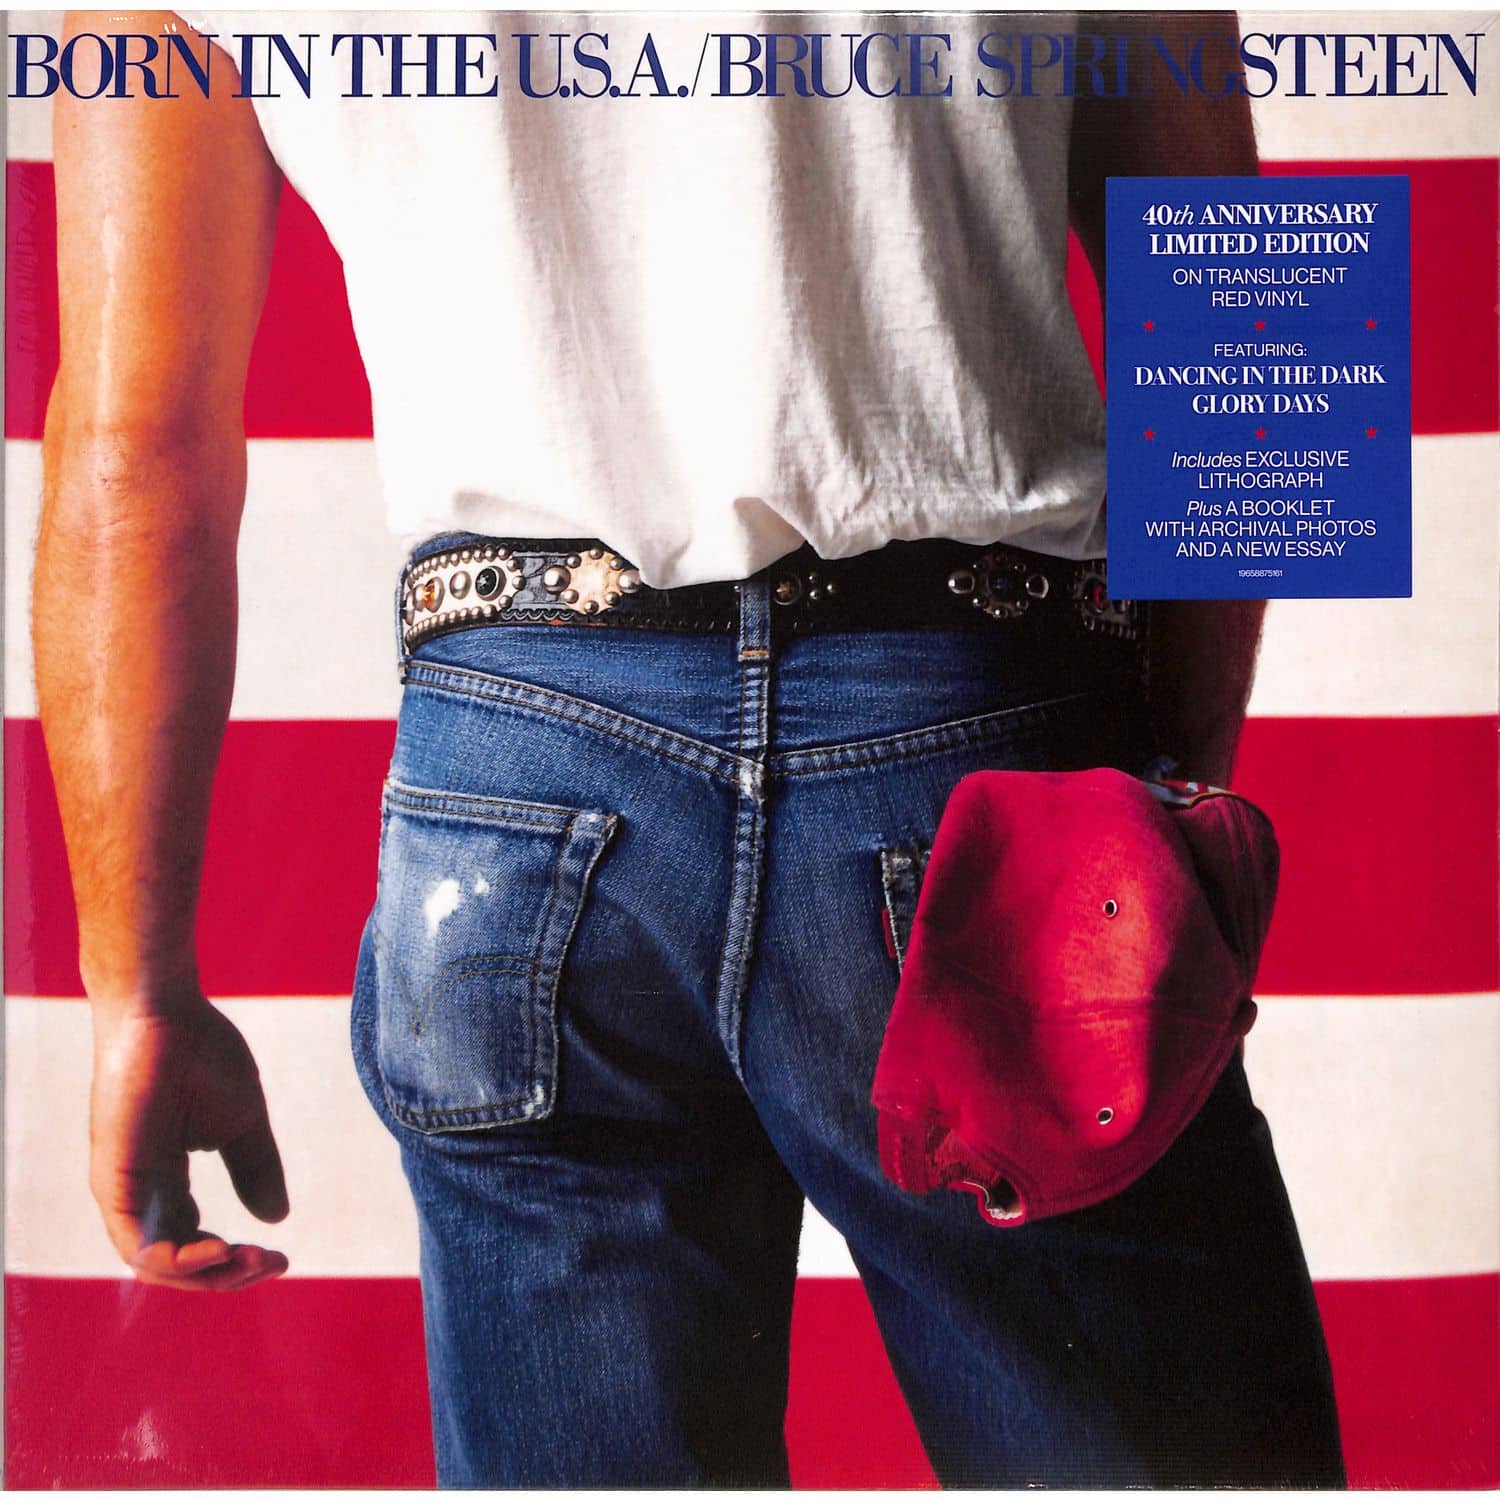 Bruce Springsteen - BORN IN THE U.S.A.  